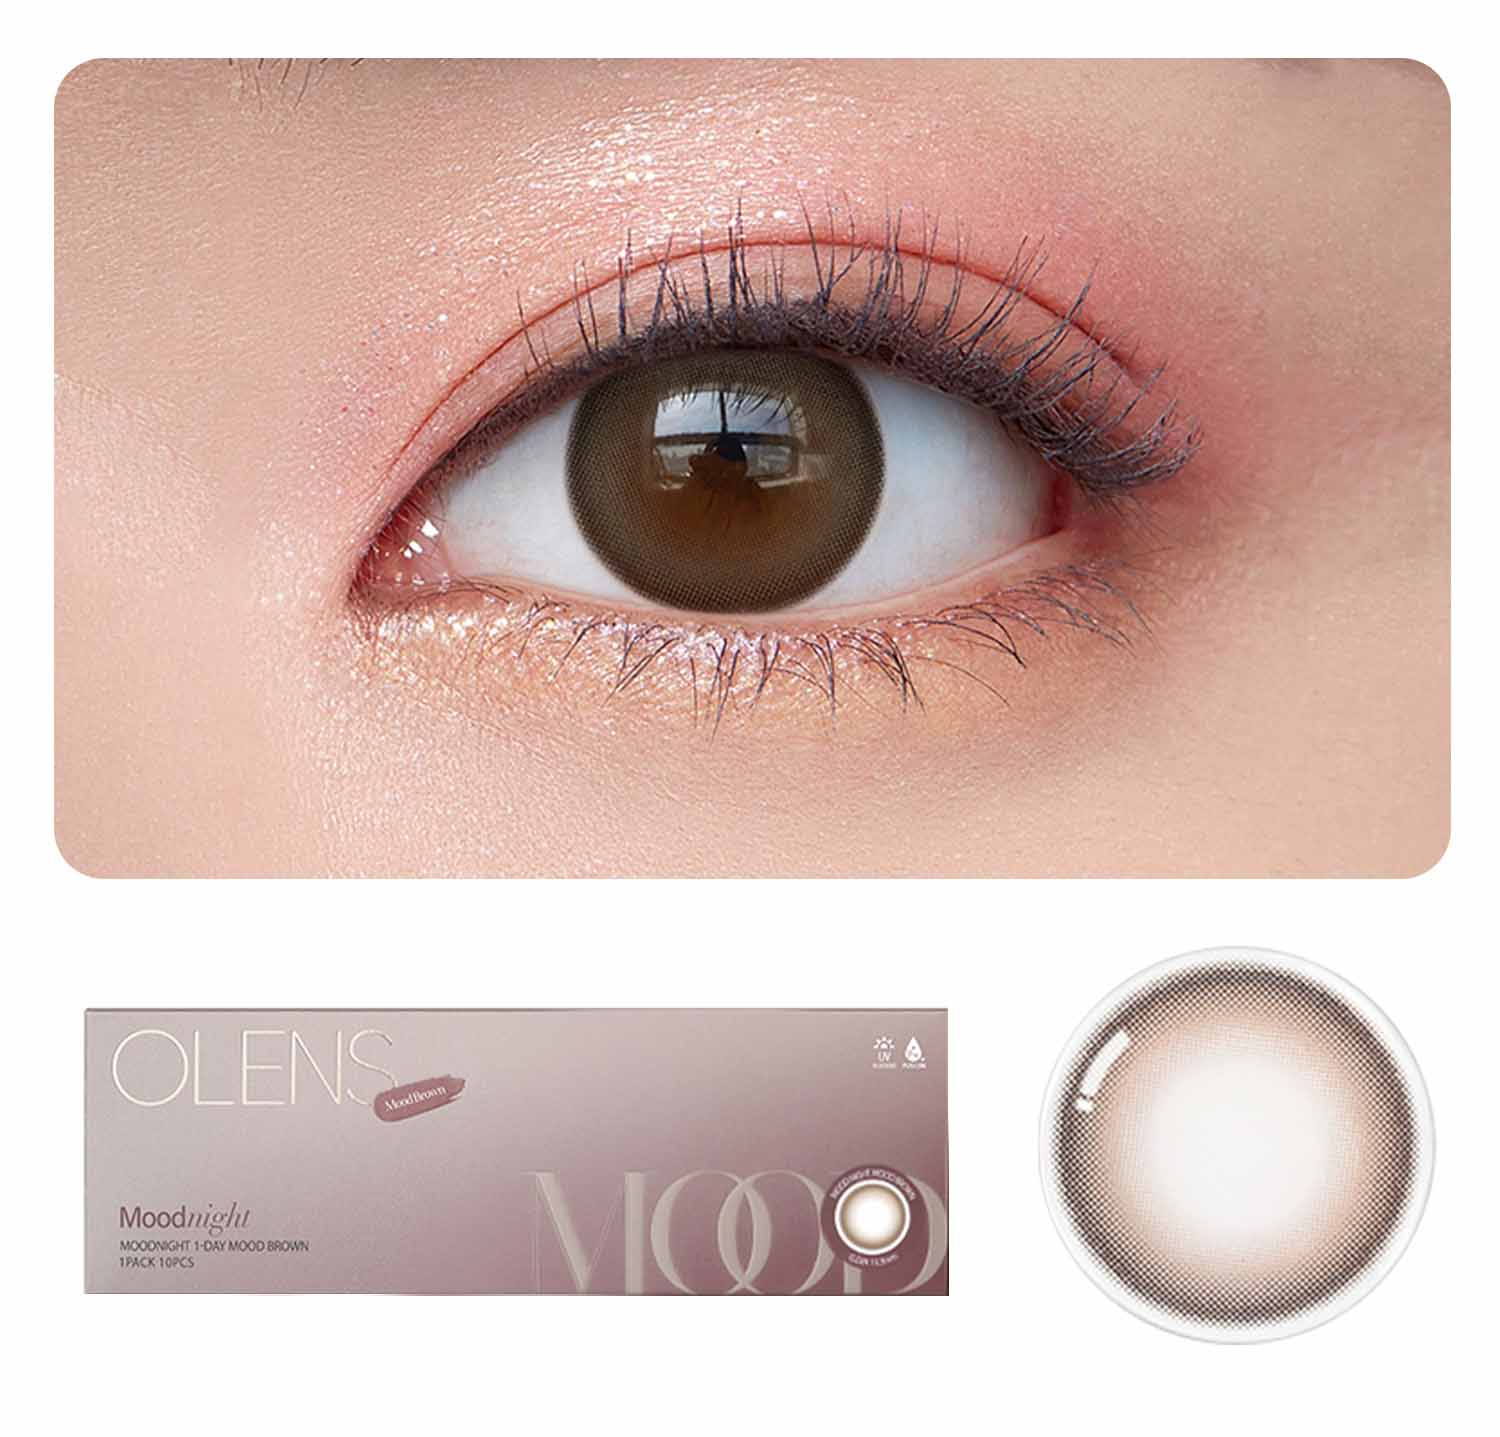 OLENS Premium Color Contact Lens | Mood Night Brown Lens | 1 day disposable | o-lens.co.in